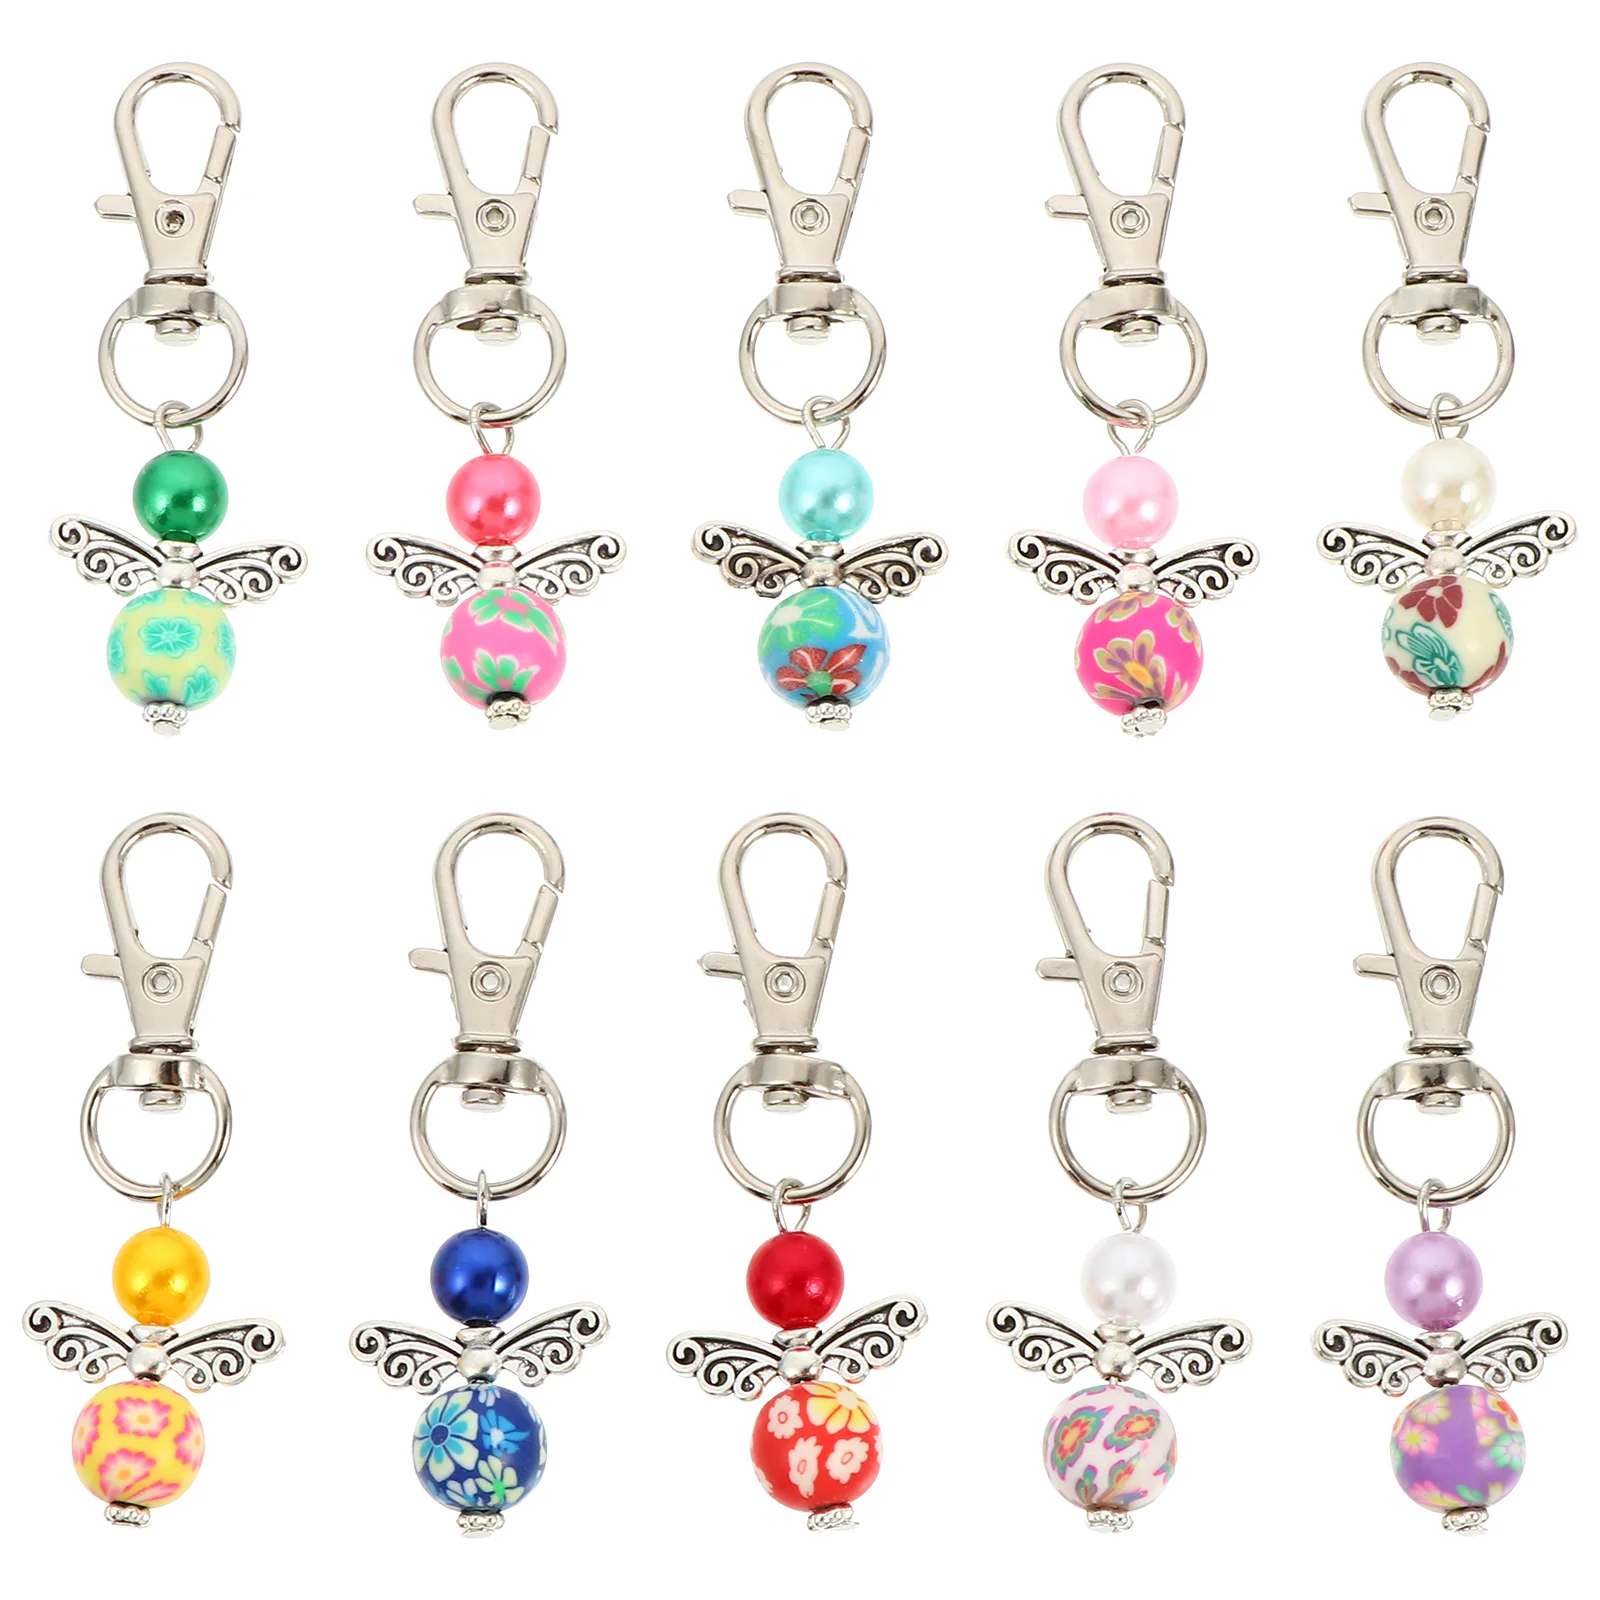 

10 Pcs Backpack Tote Alloy Keychain Favor Keychains Bride Ornaments Gifts Angel Wing Charms Guardian